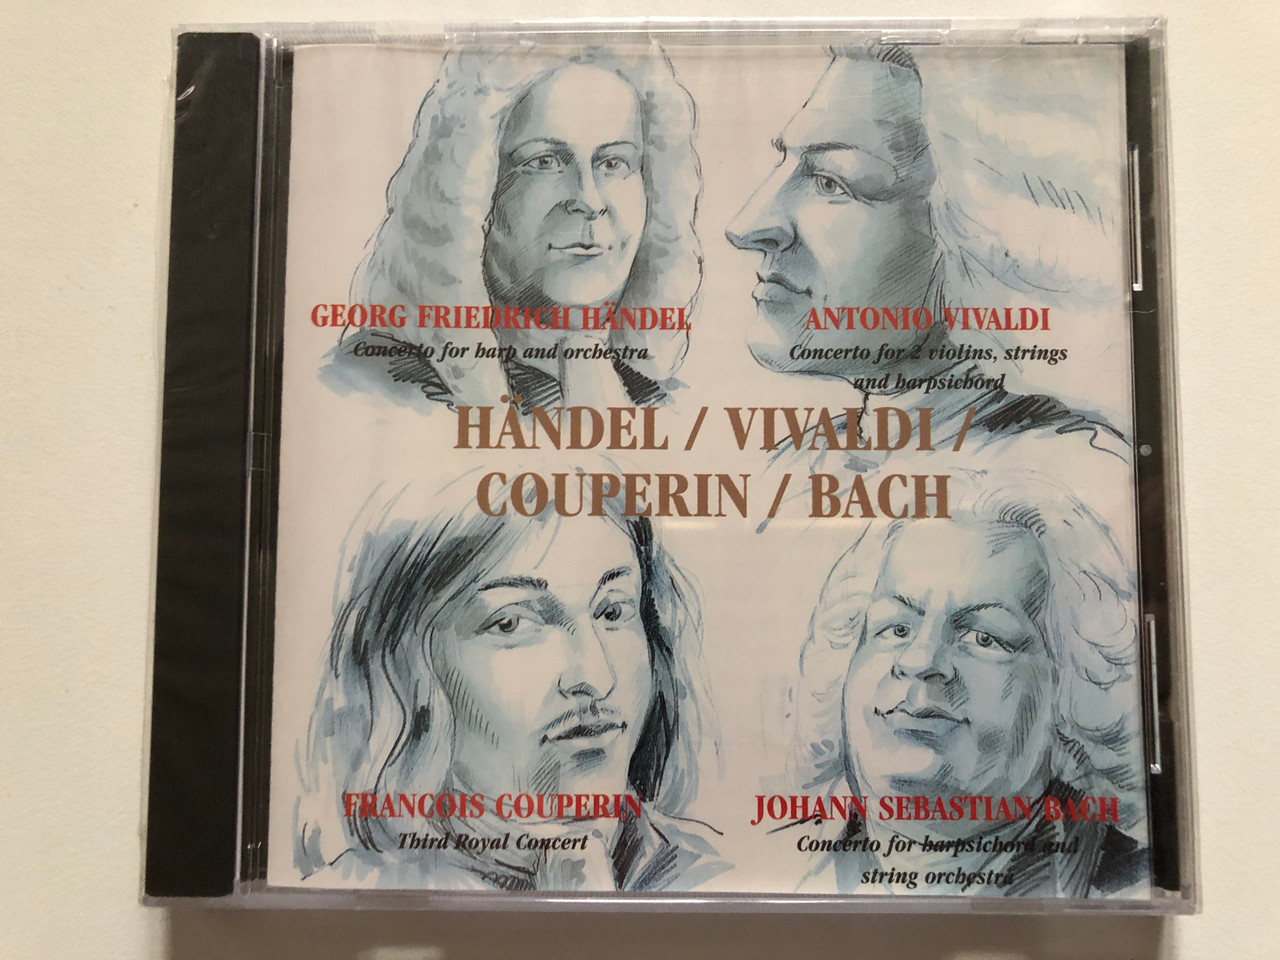 https://cdn10.bigcommerce.com/s-62bdpkt7pb/products/0/images/311379/Georg_Friedrich_Hndel_Concerto_For_Harp_And_Orchestra_Antonio_Vivaldi_Concerto_For_2_Violins_Strings_And_Harpsichord_Franois_Couperin_Third_Royal_Concert_Johann_Sebastian_Bach_Classical_1__75410.1699626875.1280.1280.JPG?c=2